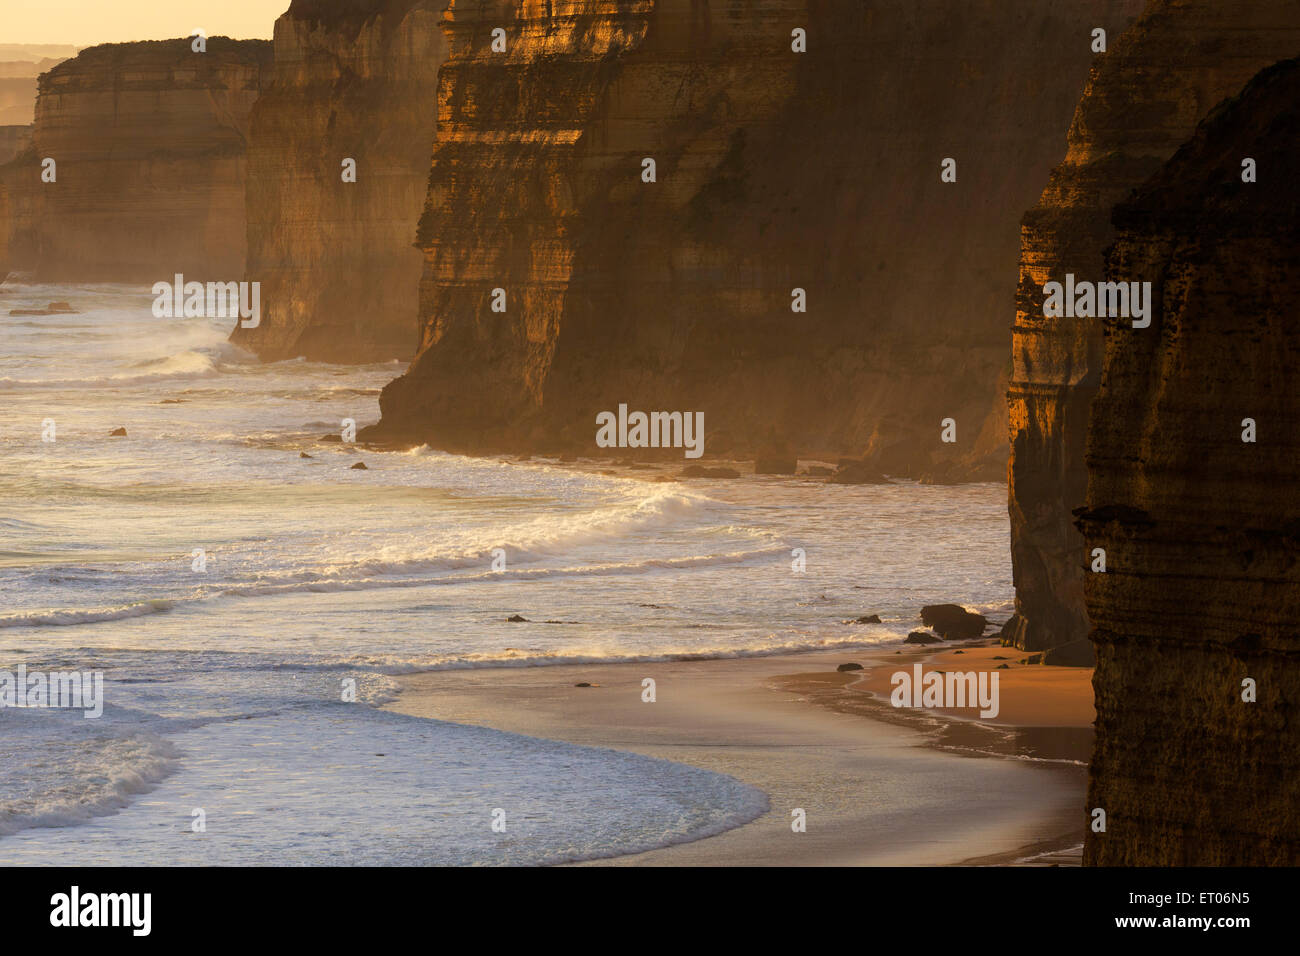 Rugged sandstone cliffs and sandy beach near Port Campbell, Great Ocean Road, Victoria, Australia Stock Photo